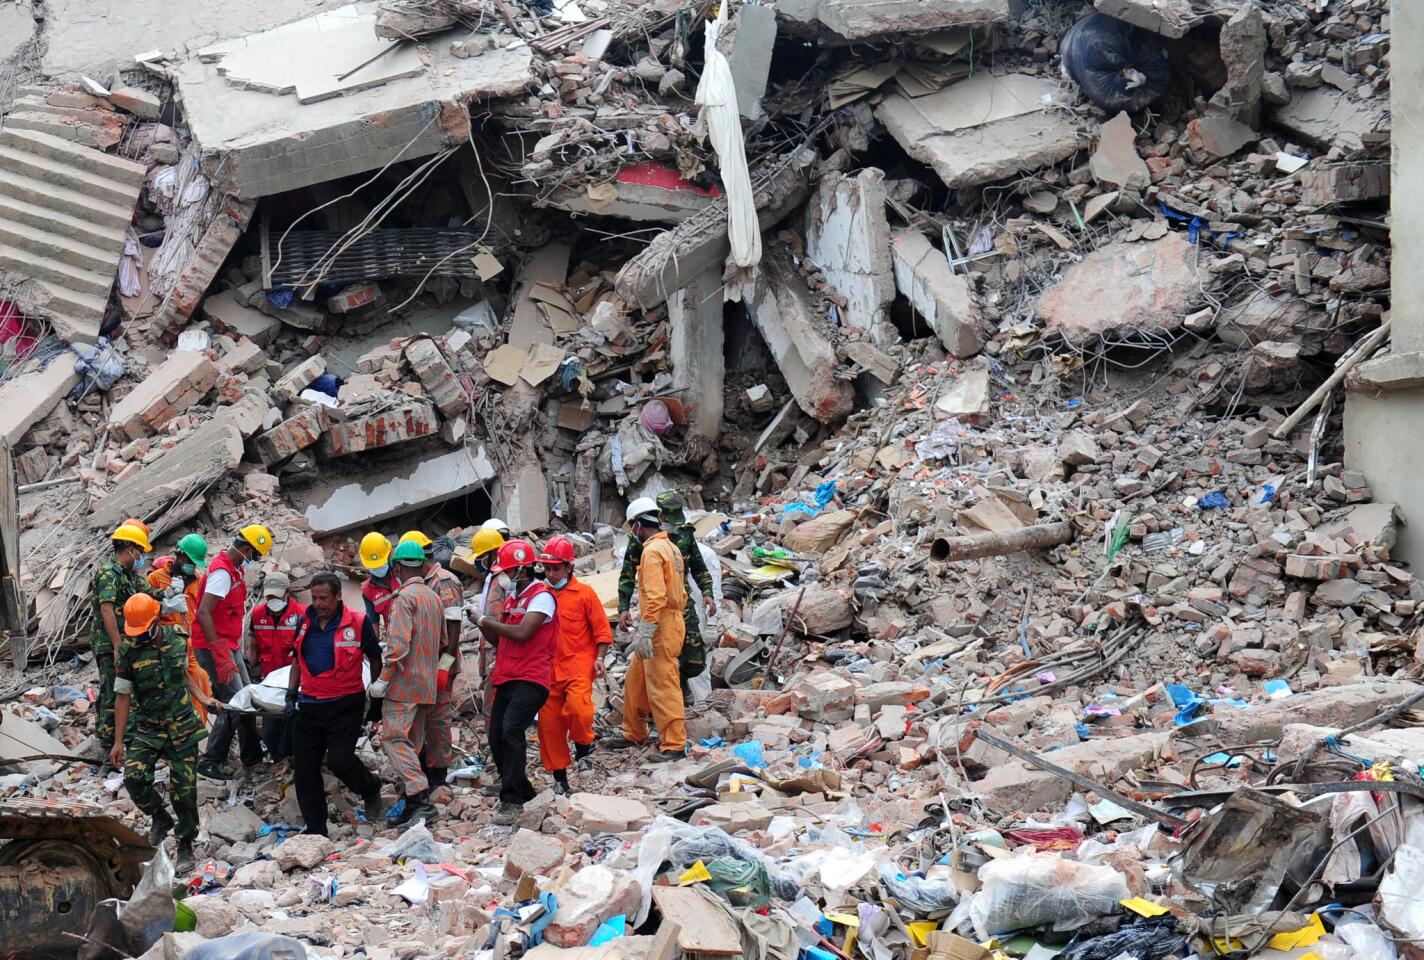 2013 garment factory collapse in Bangladesh